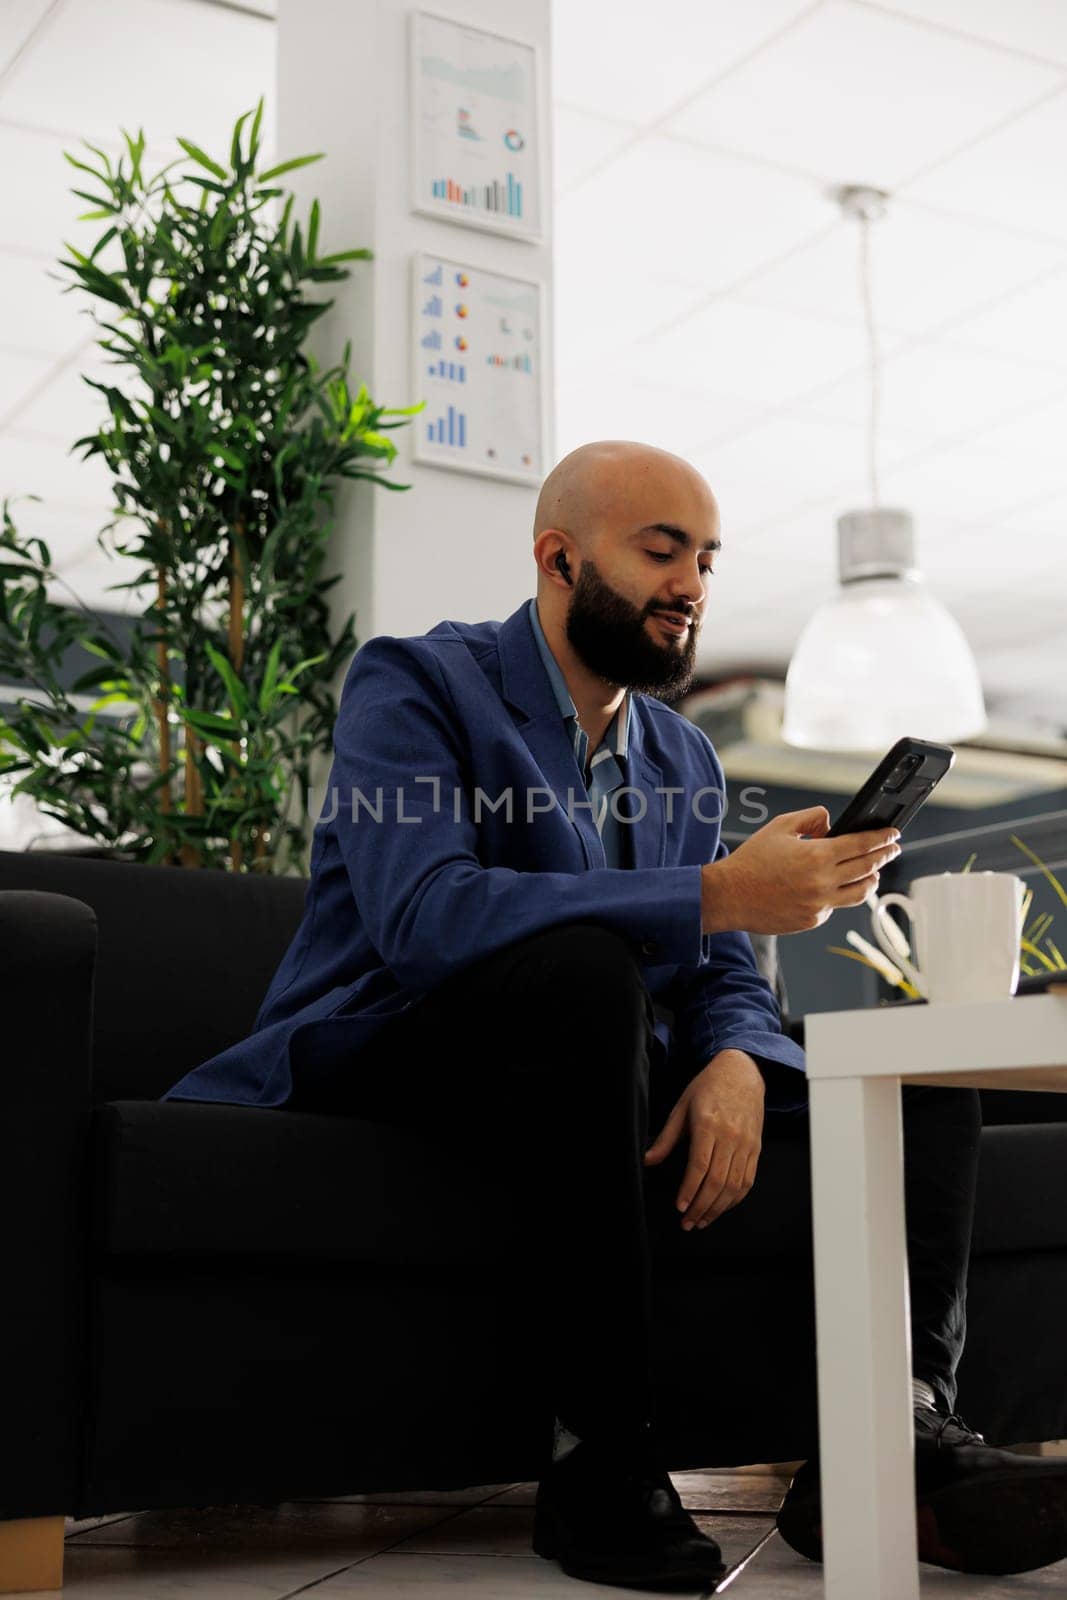 Company employee discussing business strategy on smartphone video conference. Arab professional sitting on couch and having online communication with remote team in office